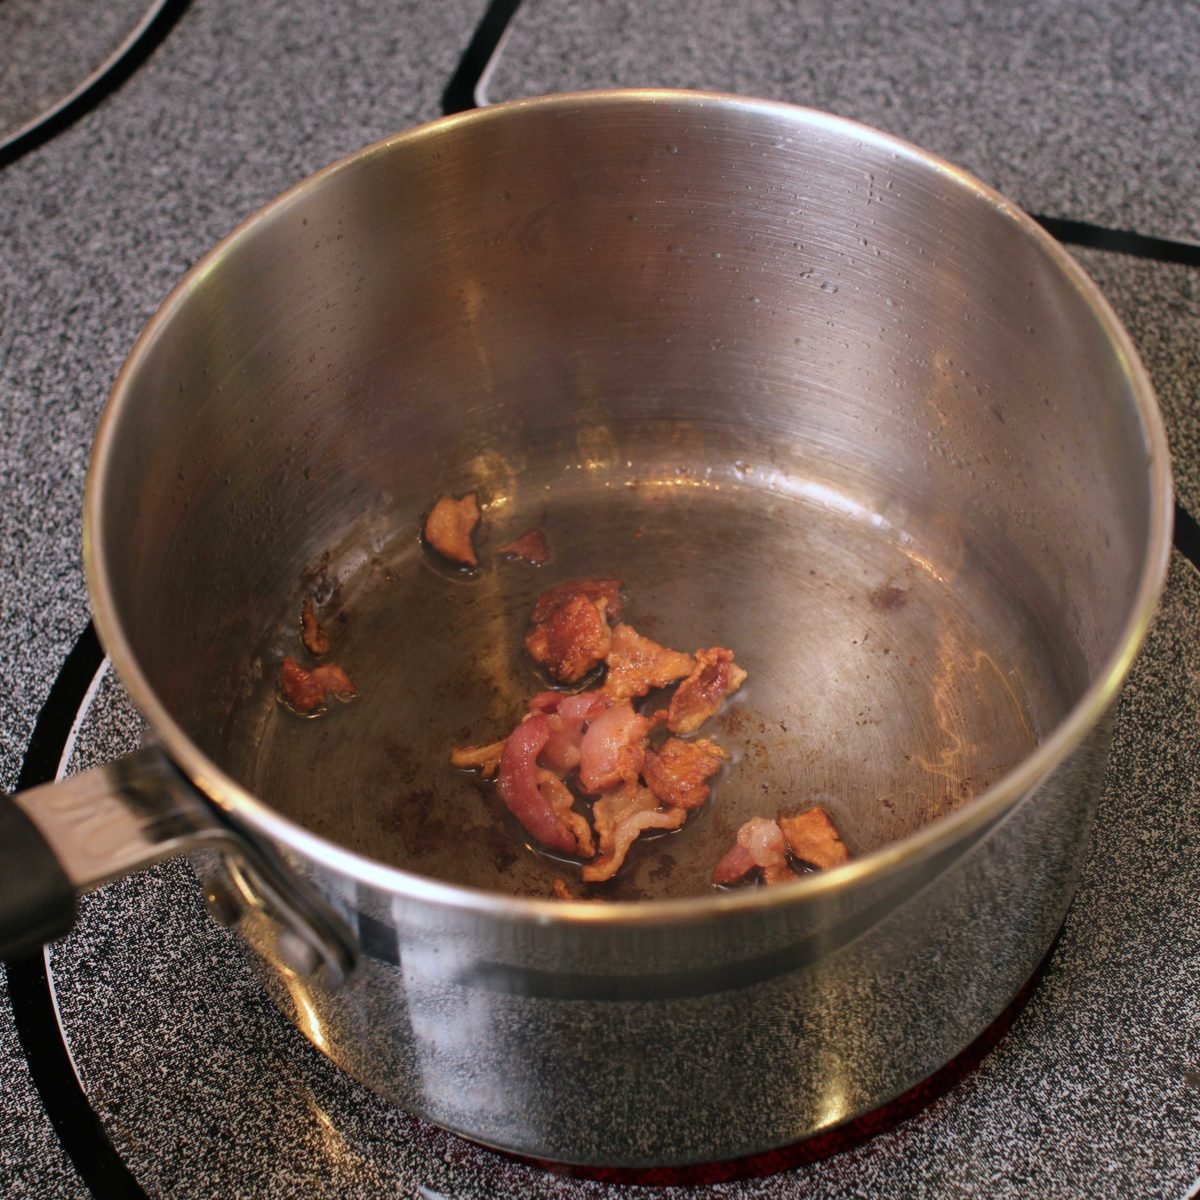 bacon pieces in a silver pot on a stove.